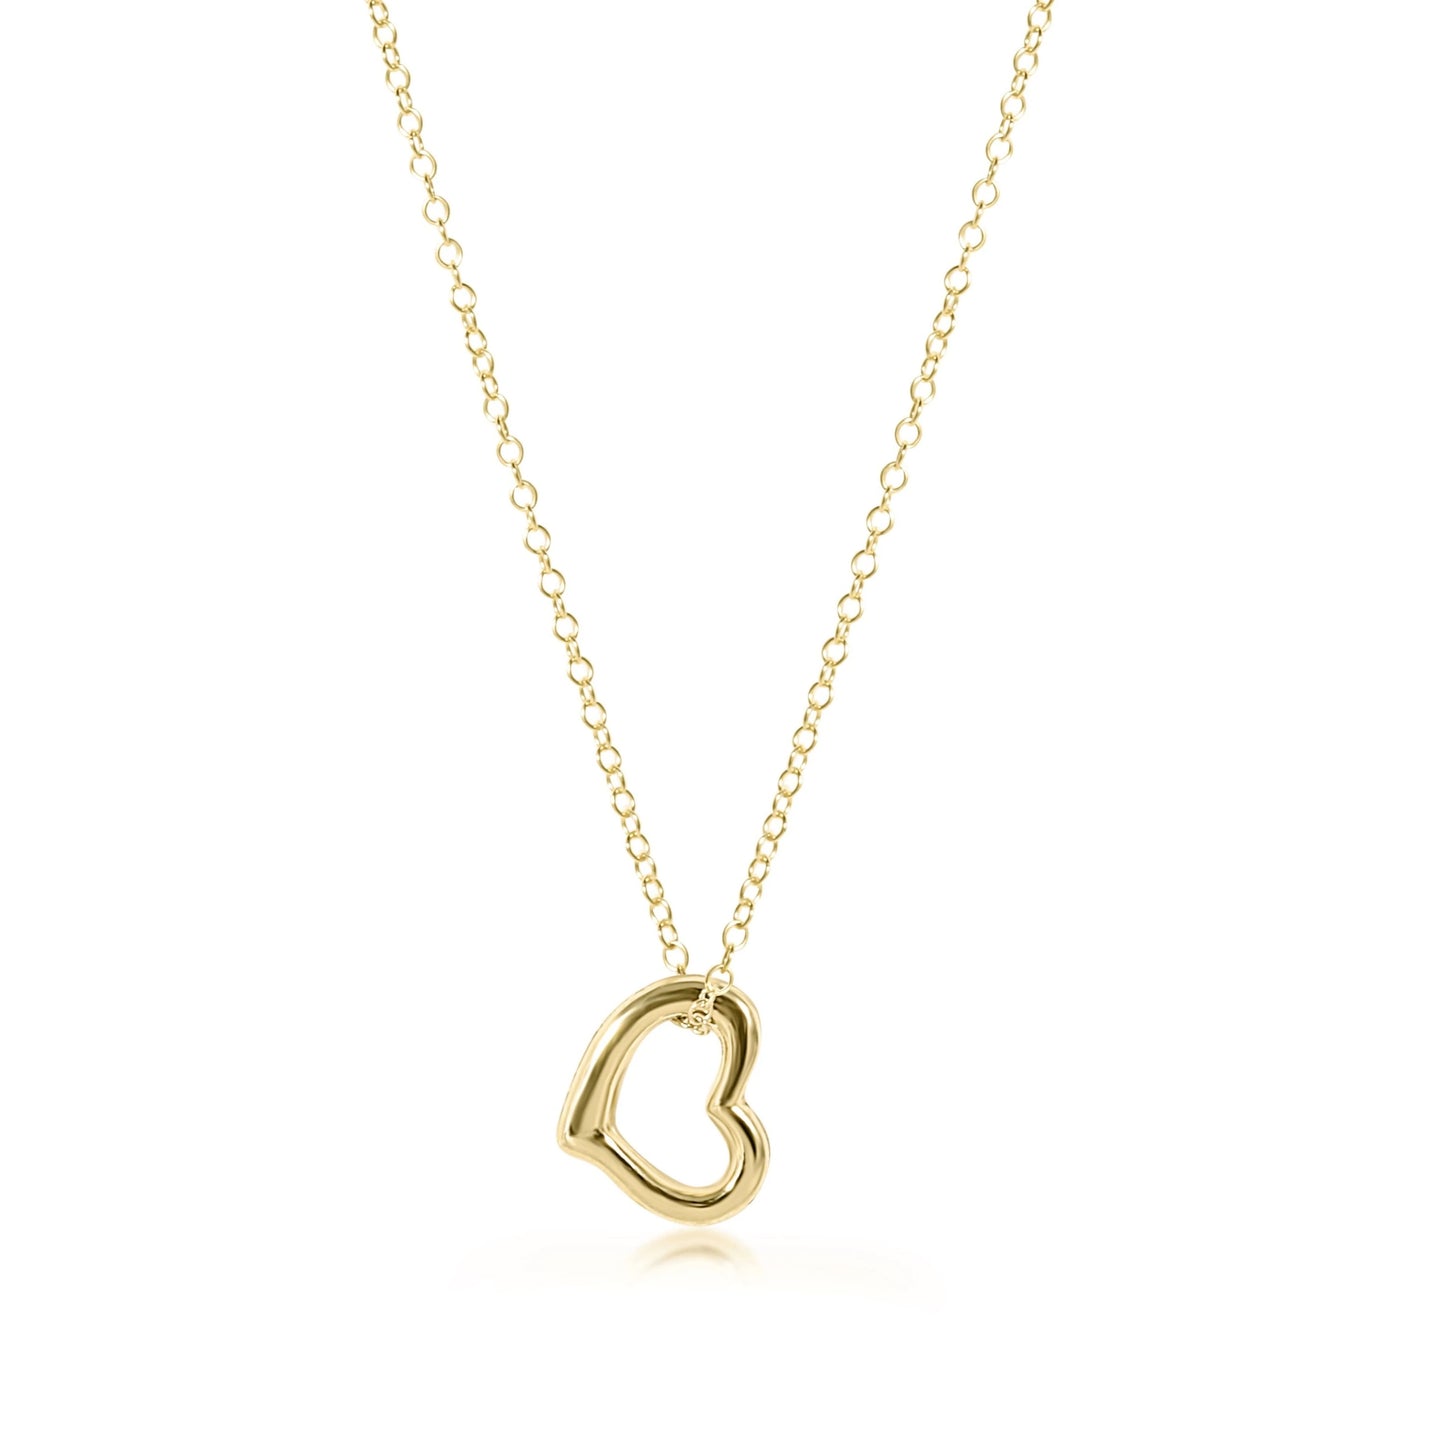 Gold Necklace 16”: Love small Gold Charm